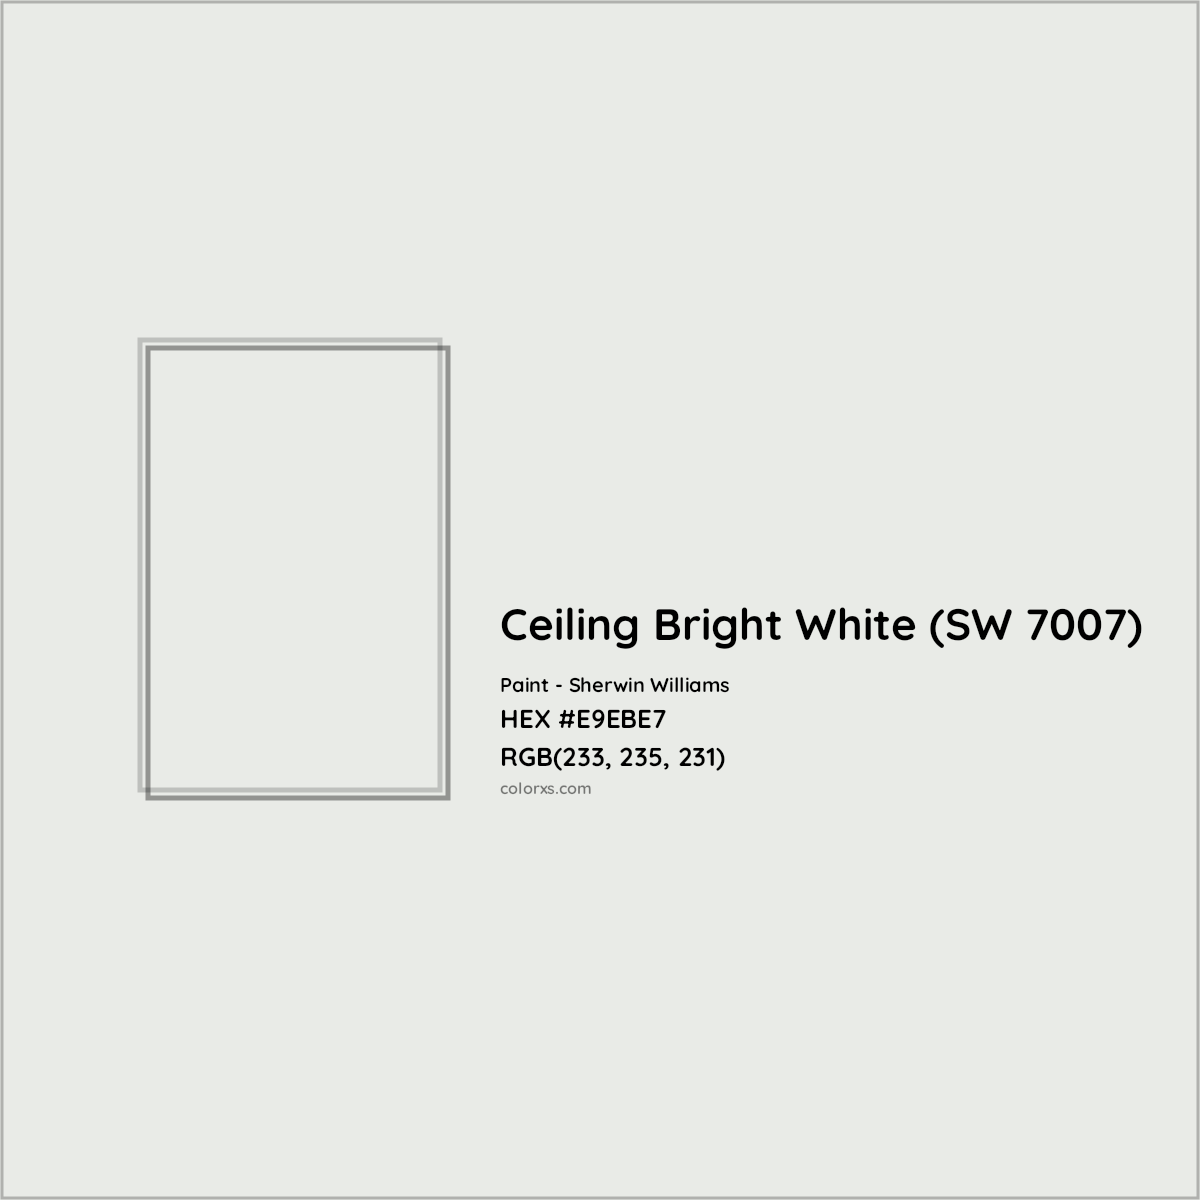 HEX #E9EBE7 Ceiling Bright White (SW 7007) Paint Sherwin Williams - Color Code